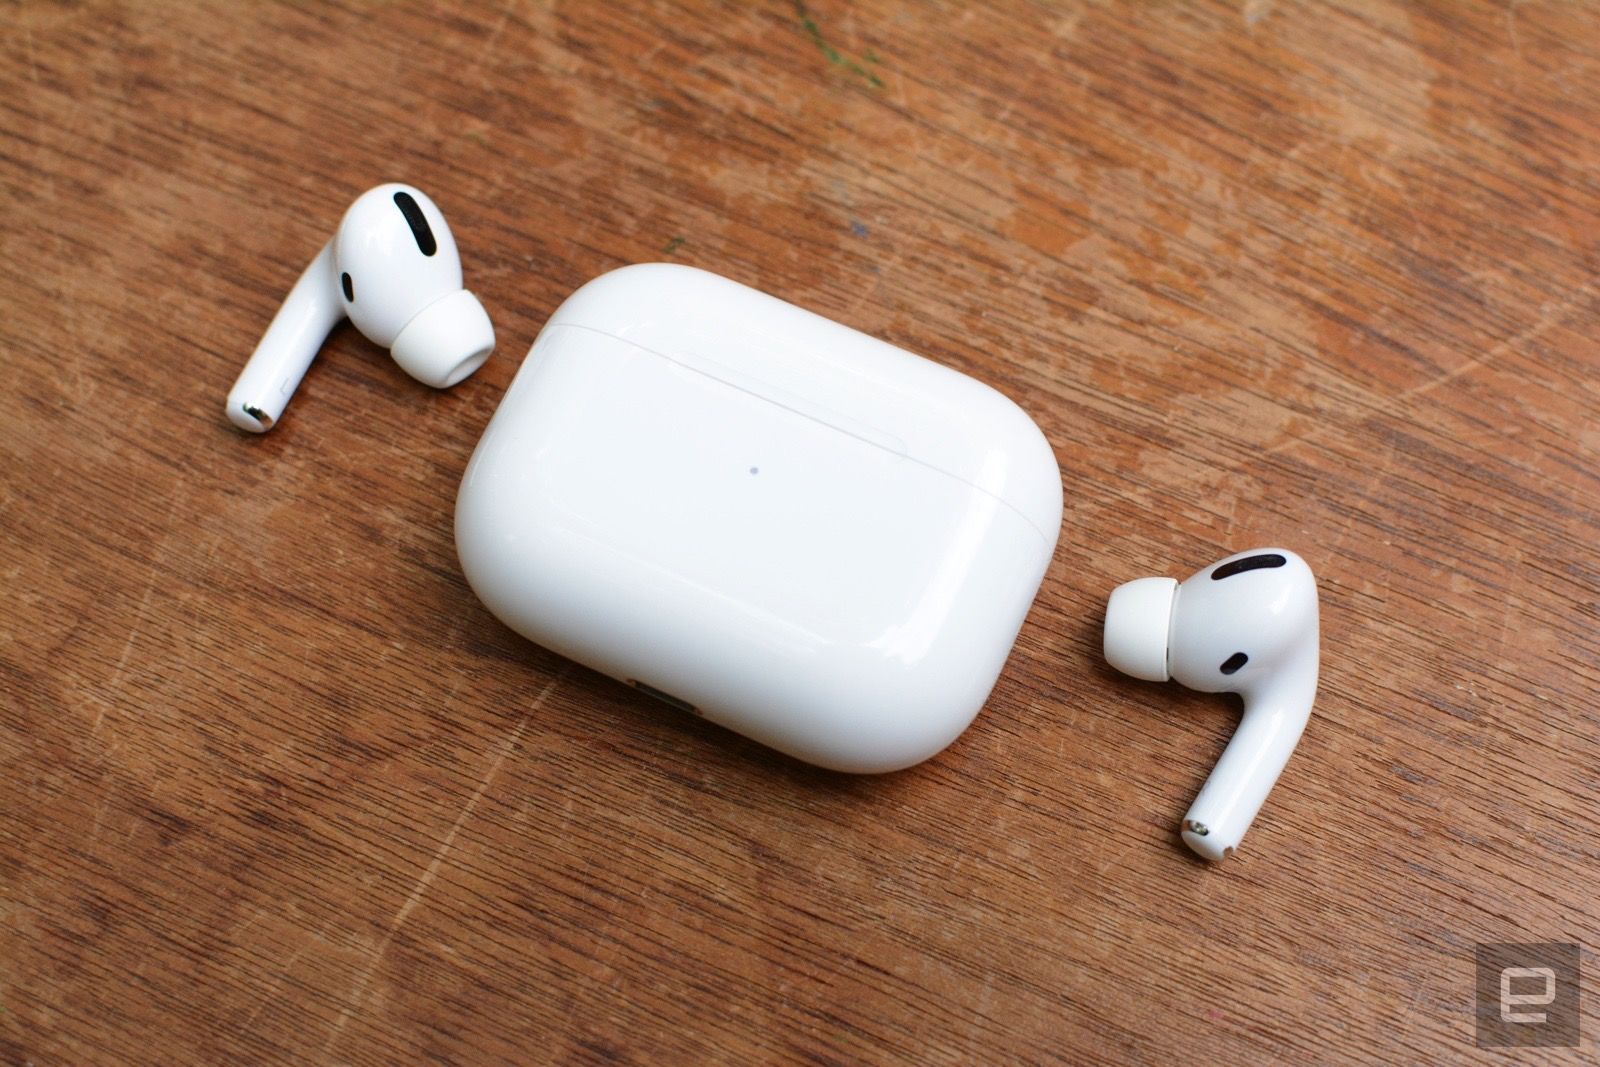 Why is One AirPod quieter than the Other?